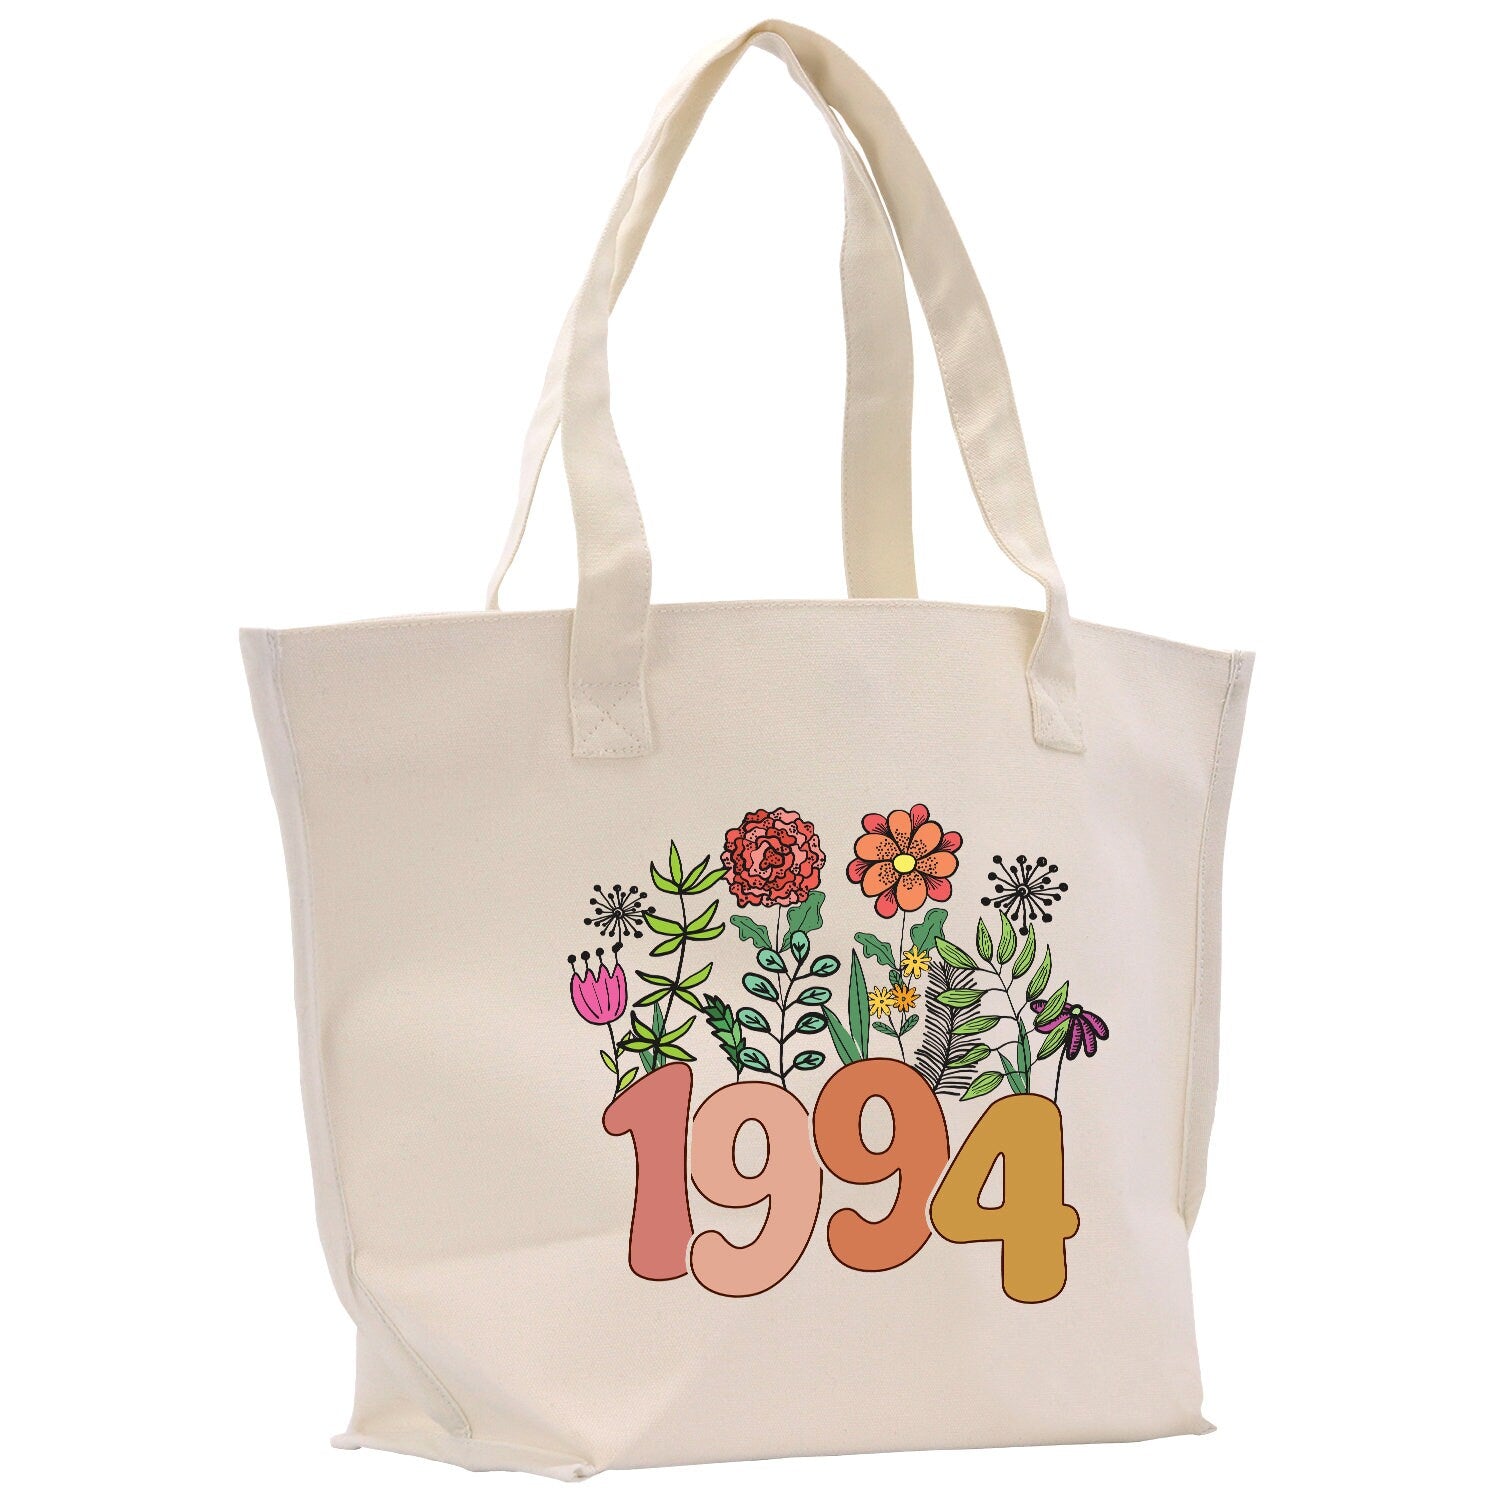 a white tote bag with flowers and the year 1994 printed on it